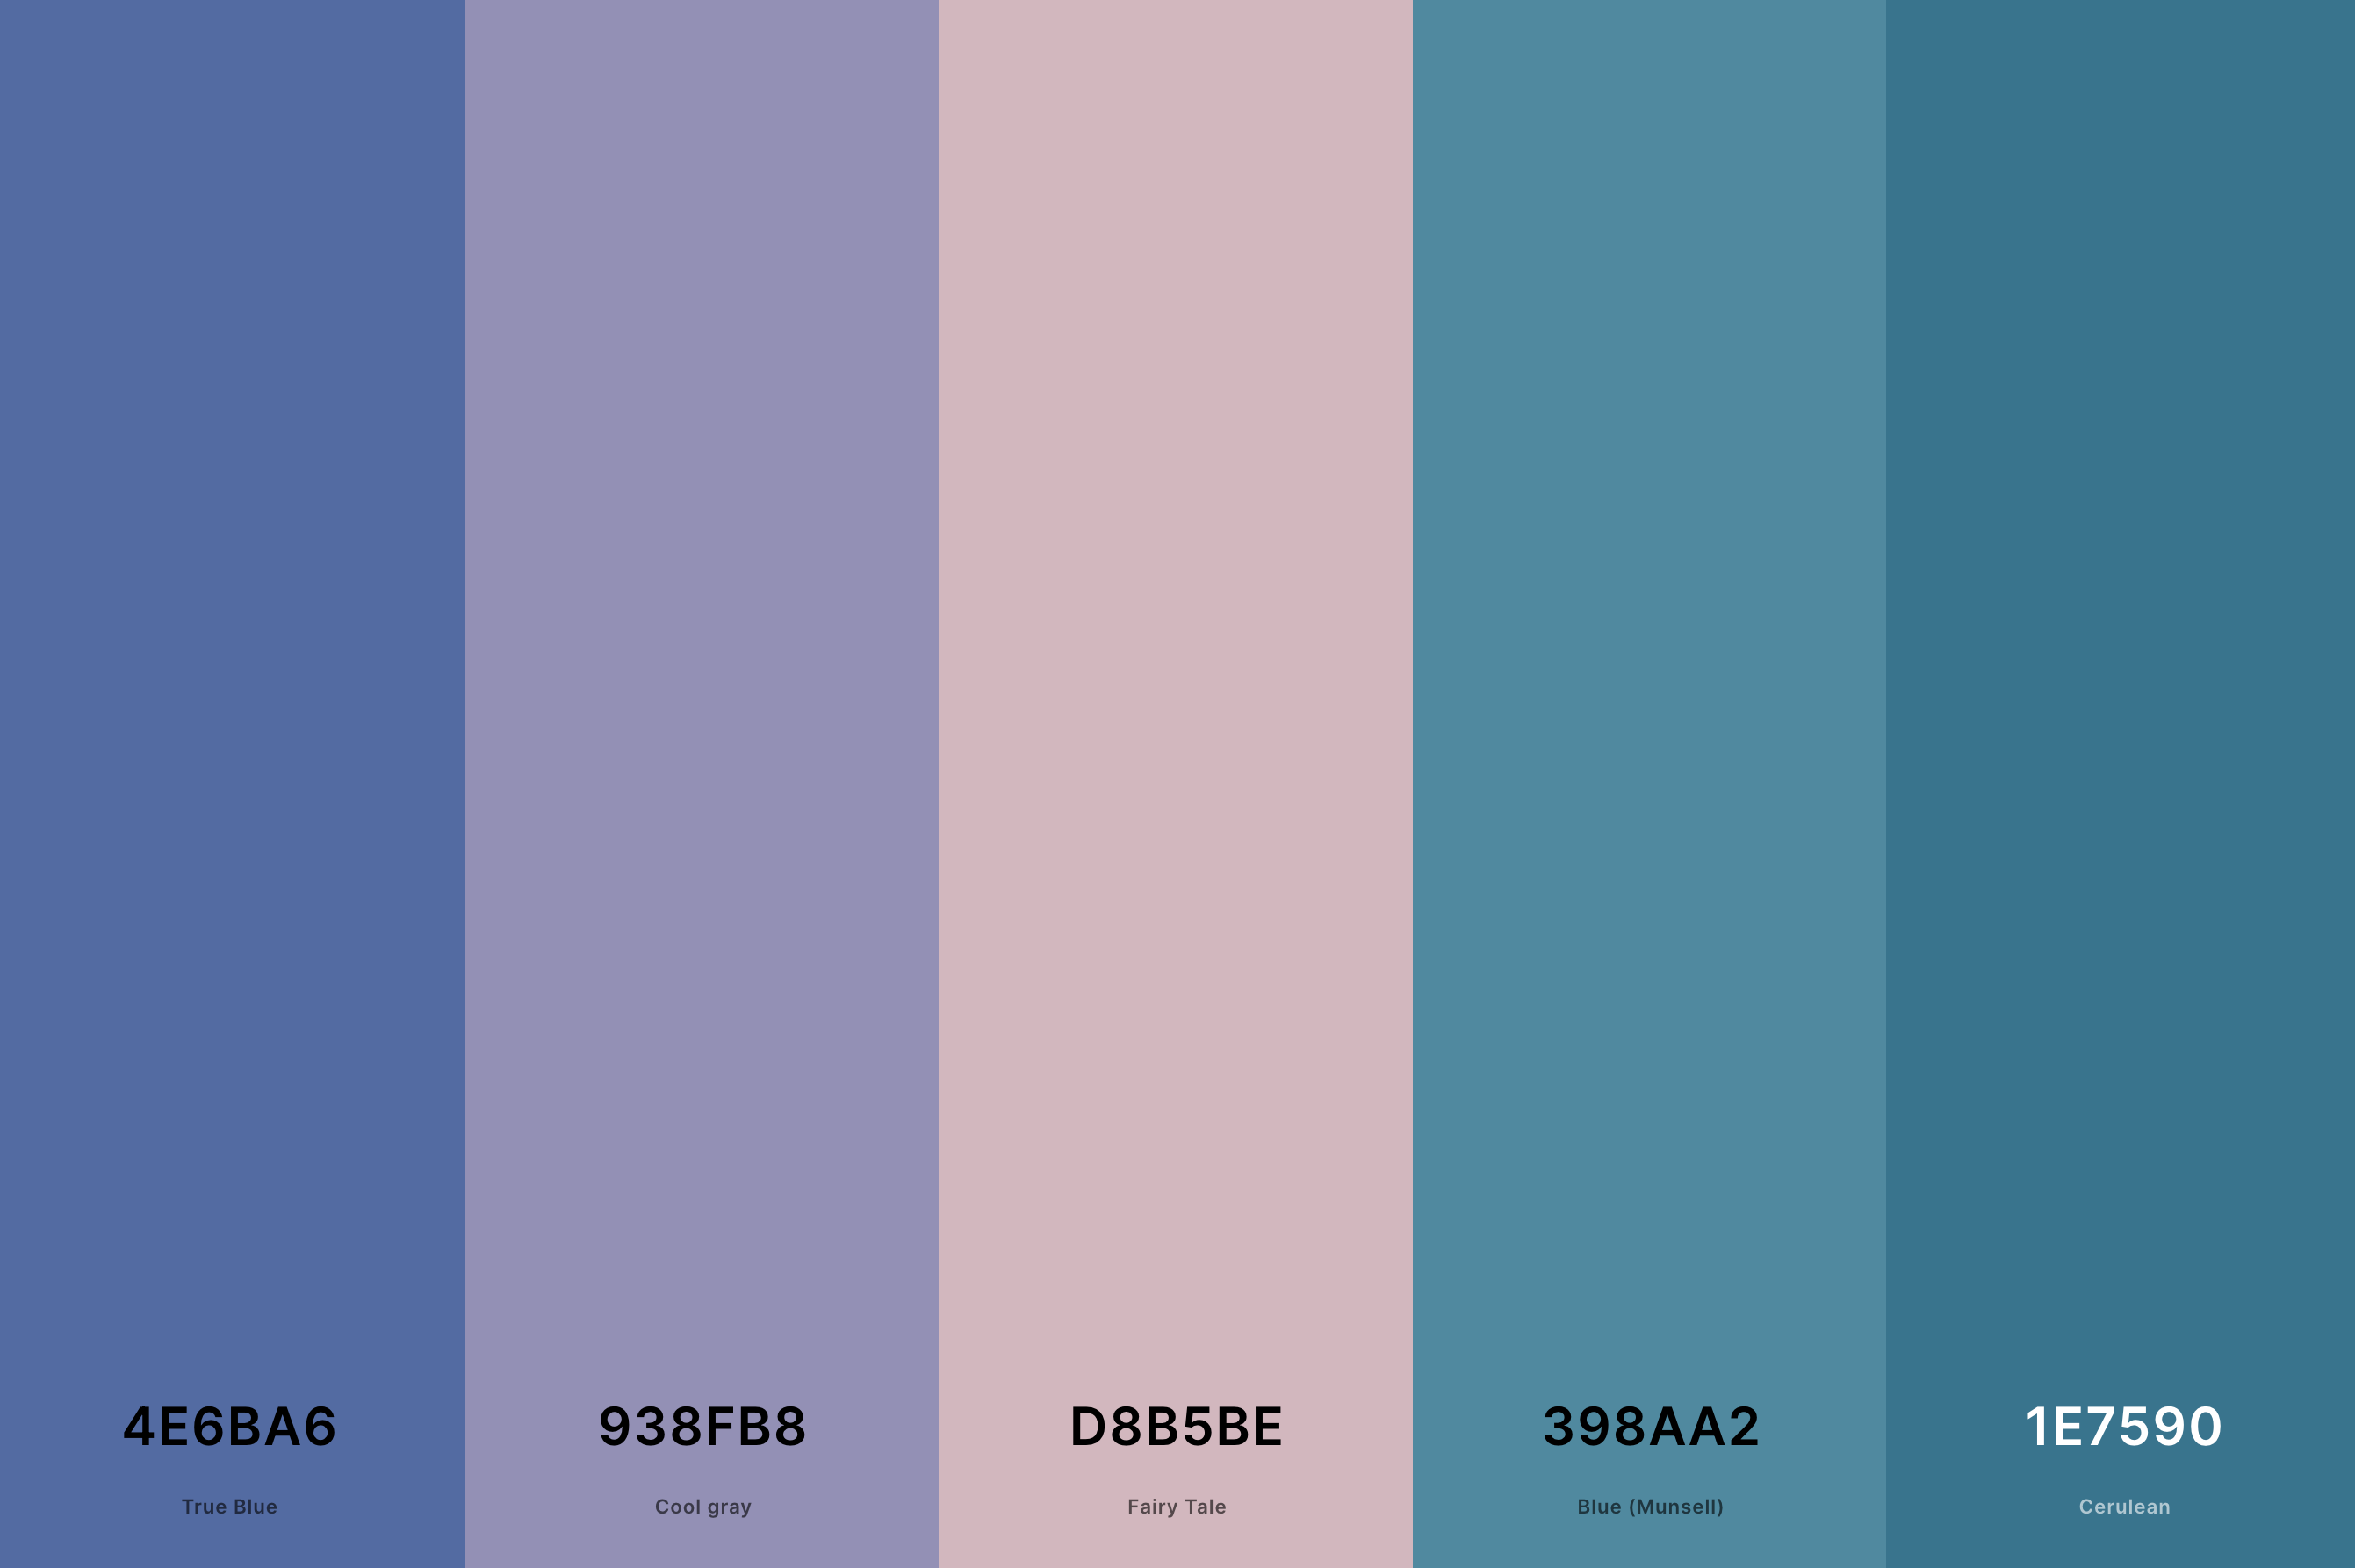 22. Dark Pastel Color Palette Color Palette with True Blue (Hex #4E6BA6) + Cool Gray (Hex #938FB8) + Fairy Tale (Hex #D8B5BE) + Blue (Munsell) (Hex #398AA2) + Cerulean (Hex #1E7590) Color Palette with Hex Codes